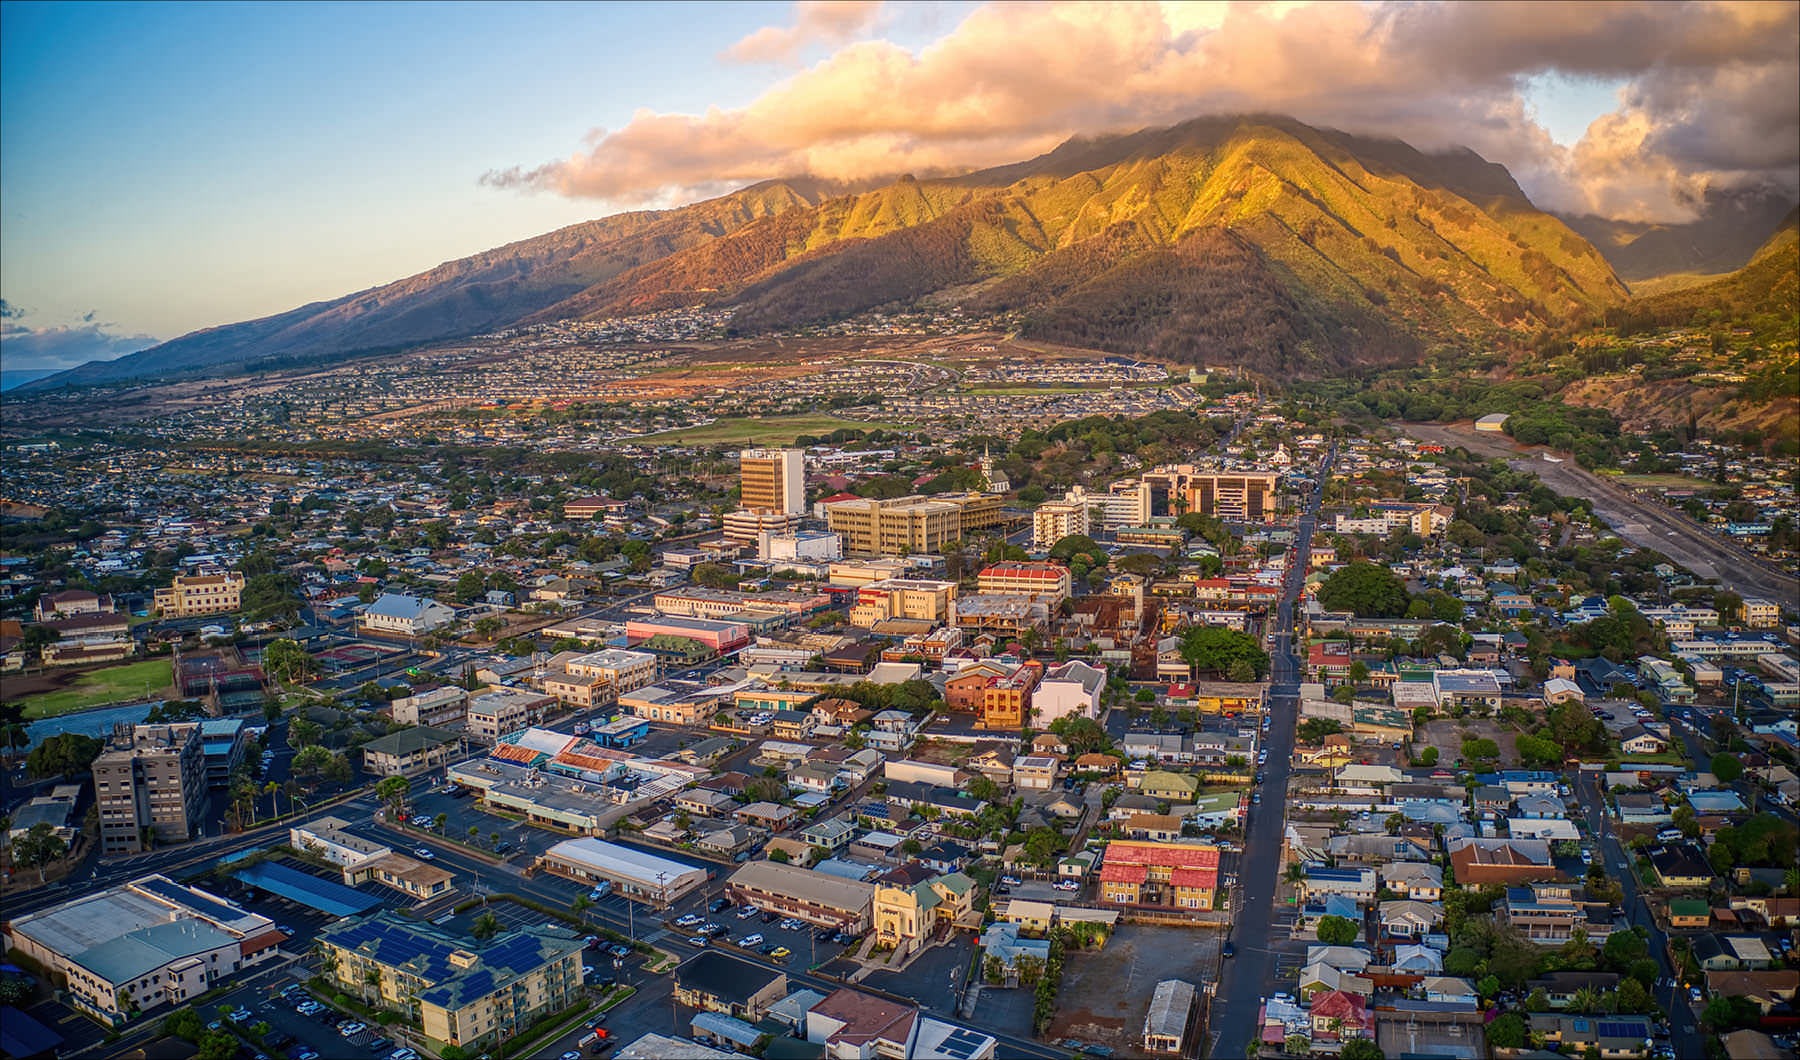 Wailuku town with the West Maui Mountains in the background